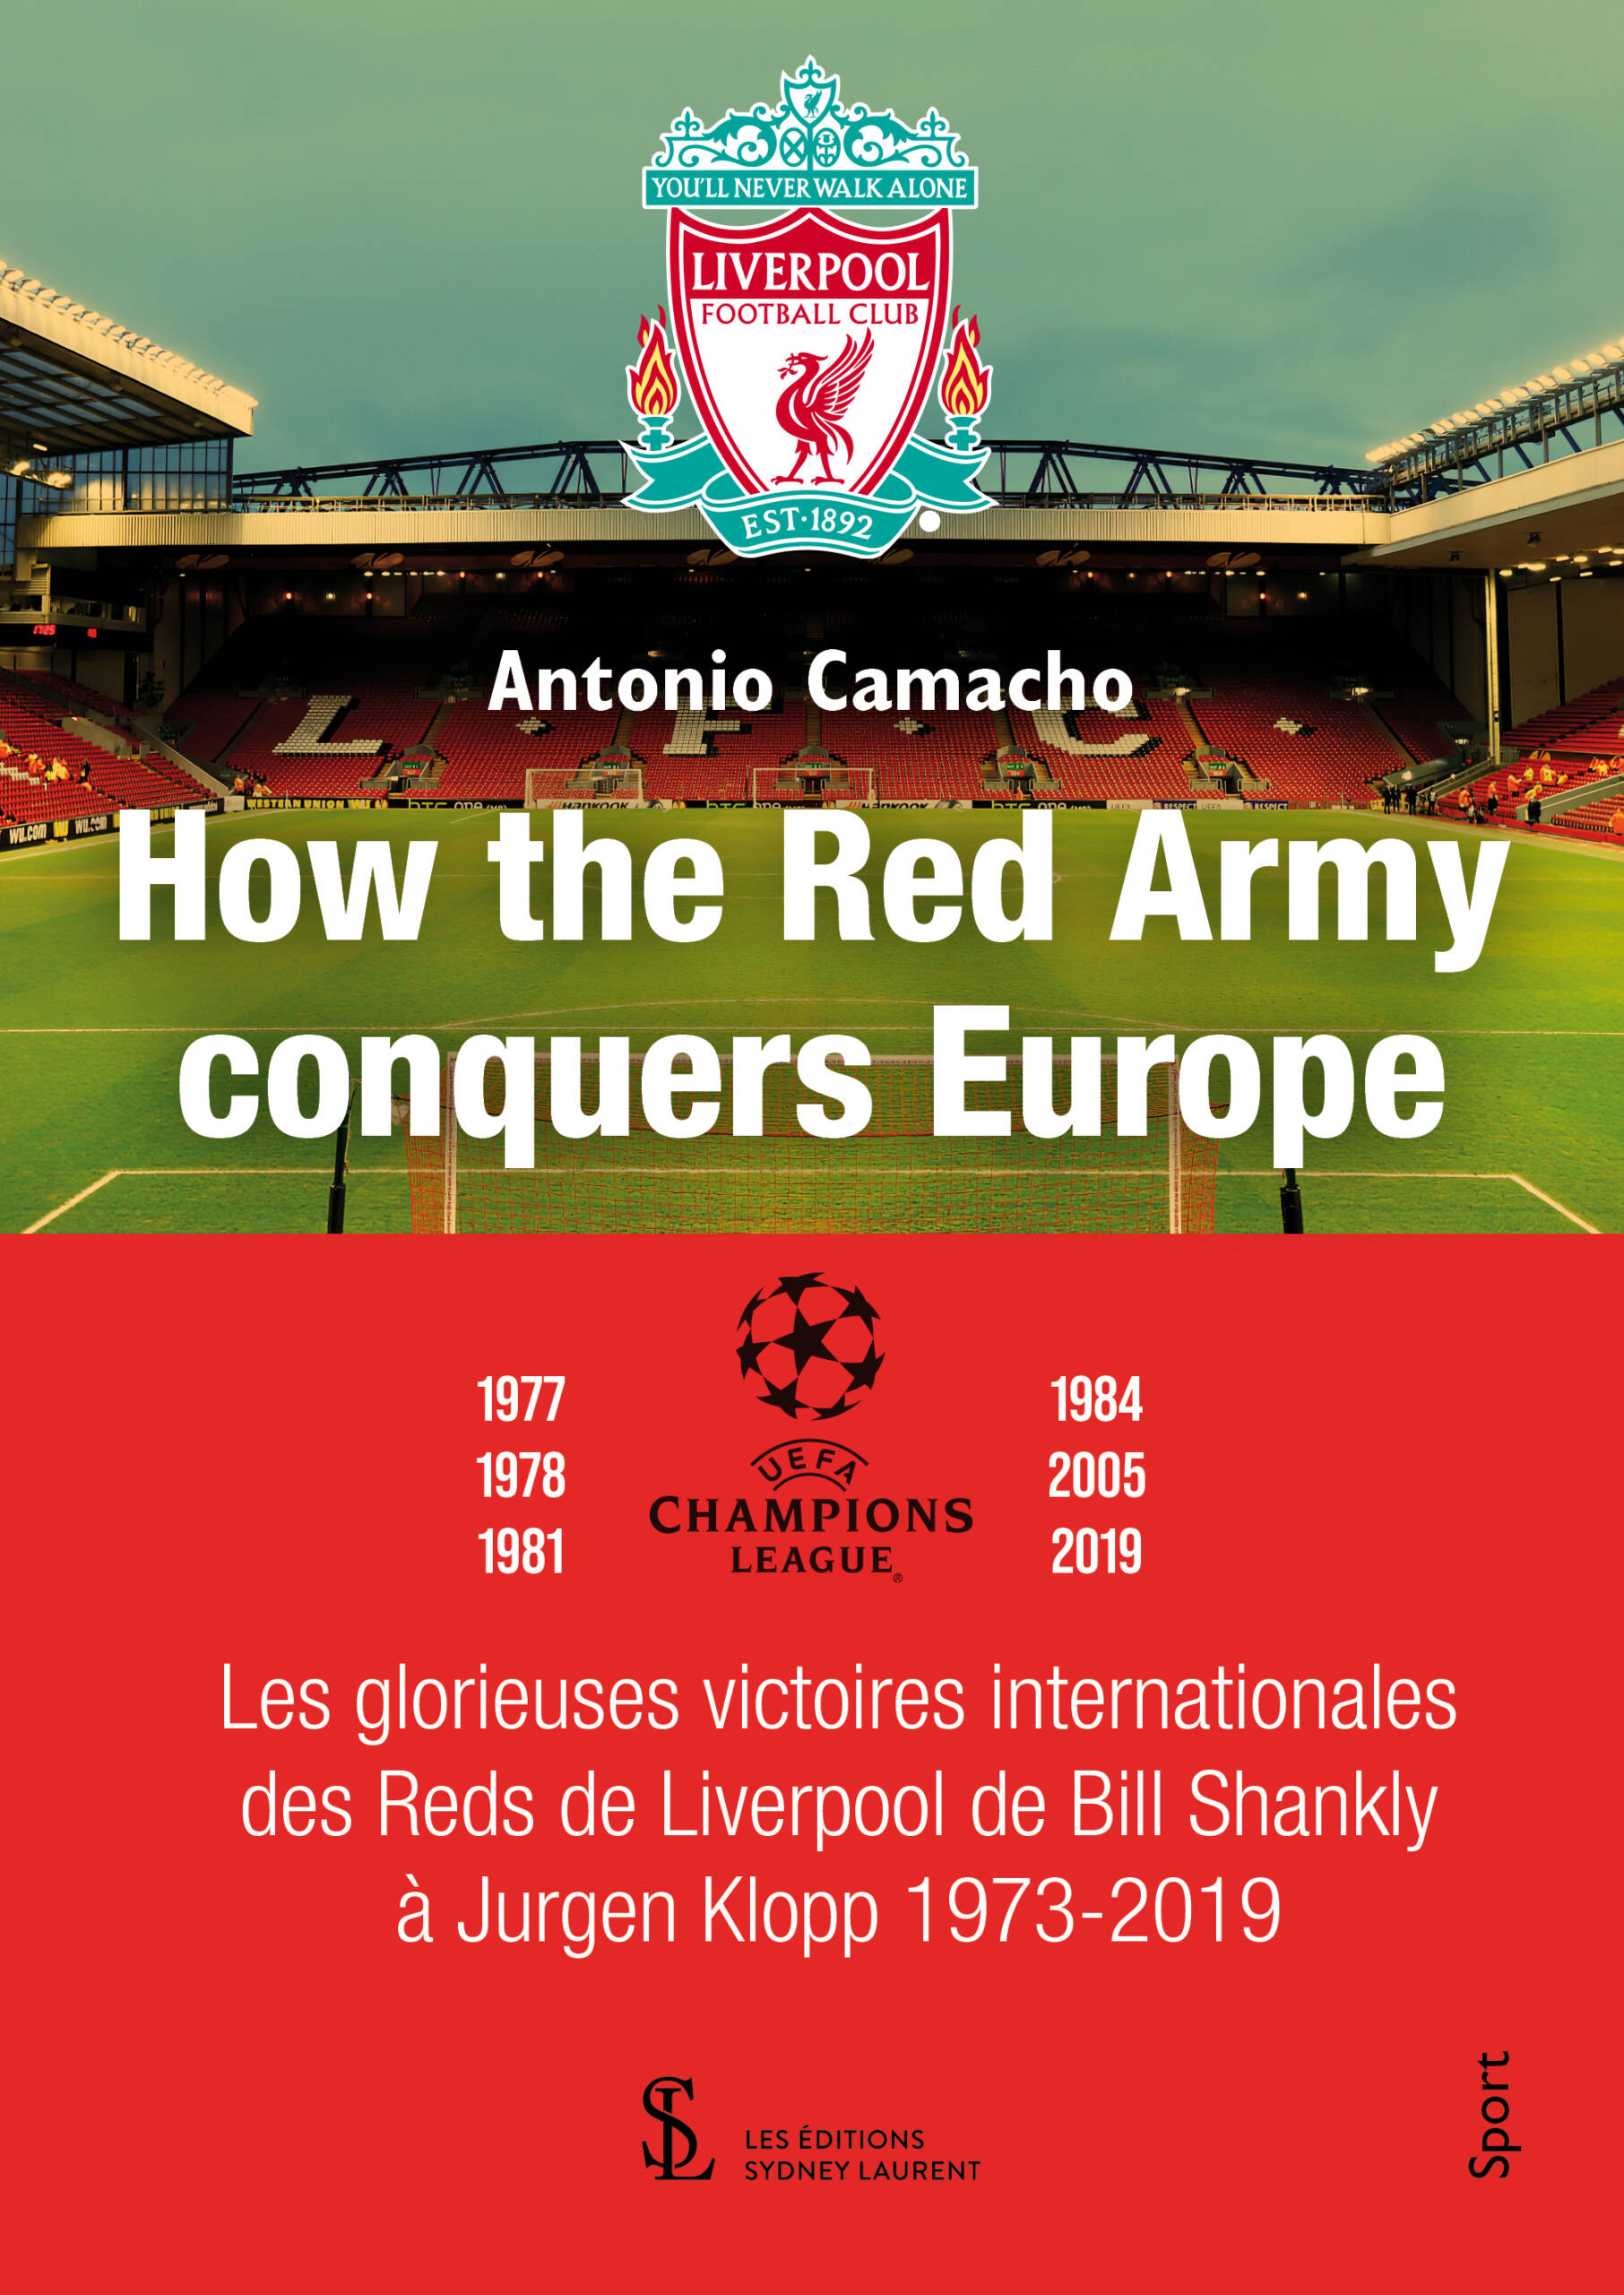 Liverpool – How the Red Army conquers Europe